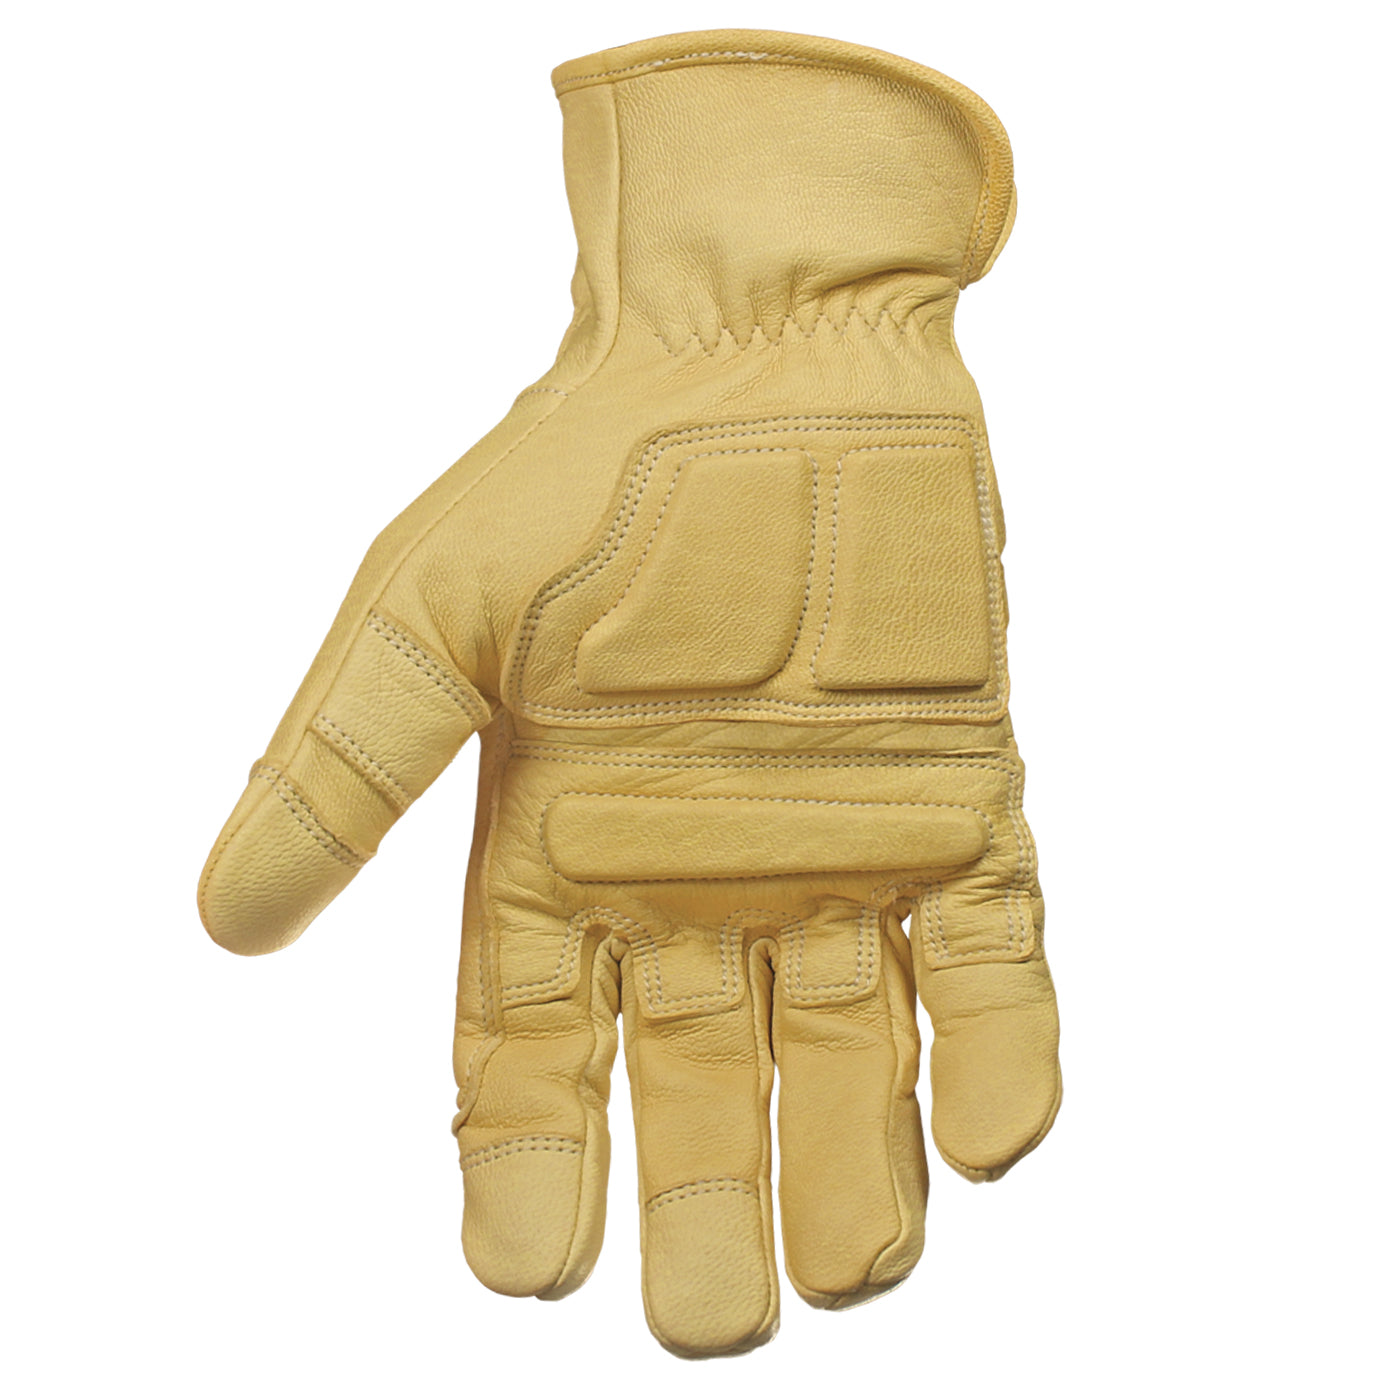 11-3210-10 Youngstown Knuckle Buster Anti Vibration Glove - main image